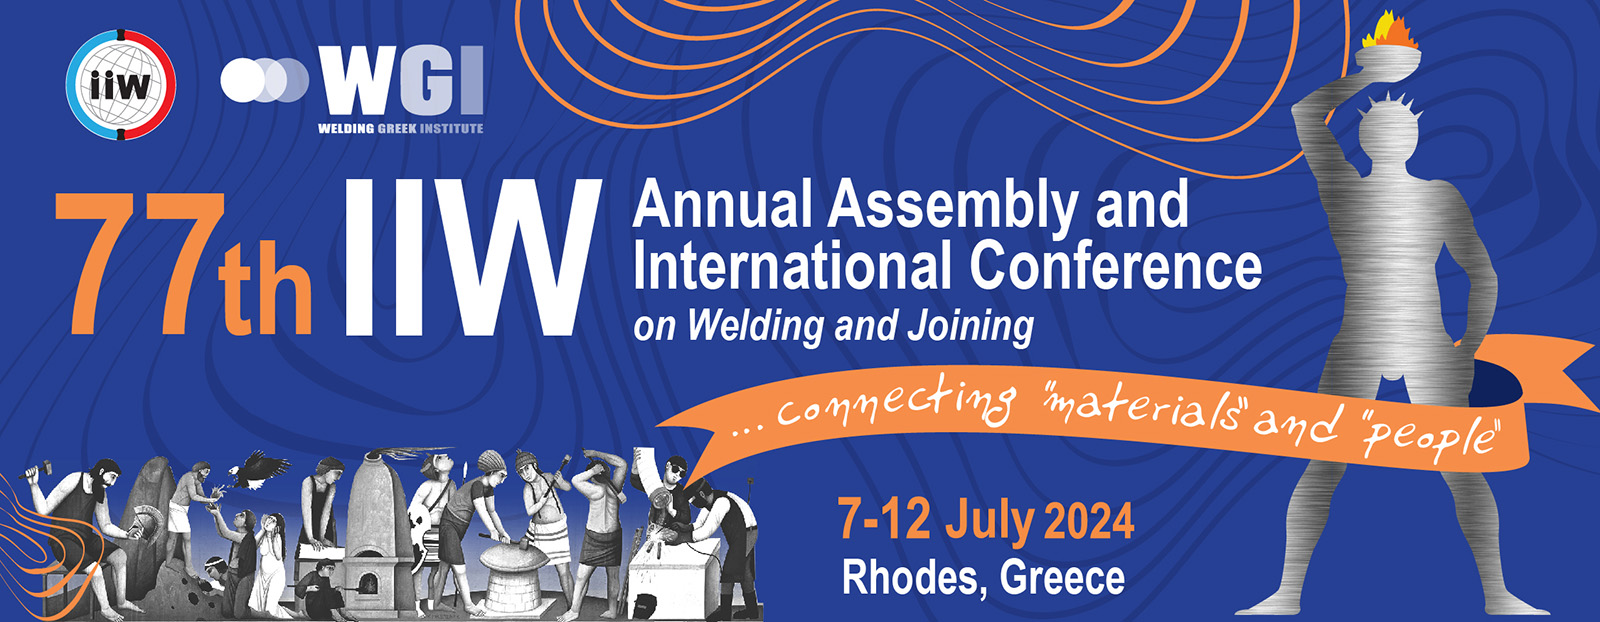 77th IIW Annual Assembly and International Conference on Welding and Joining, Rhodes, South Aegean, Greece